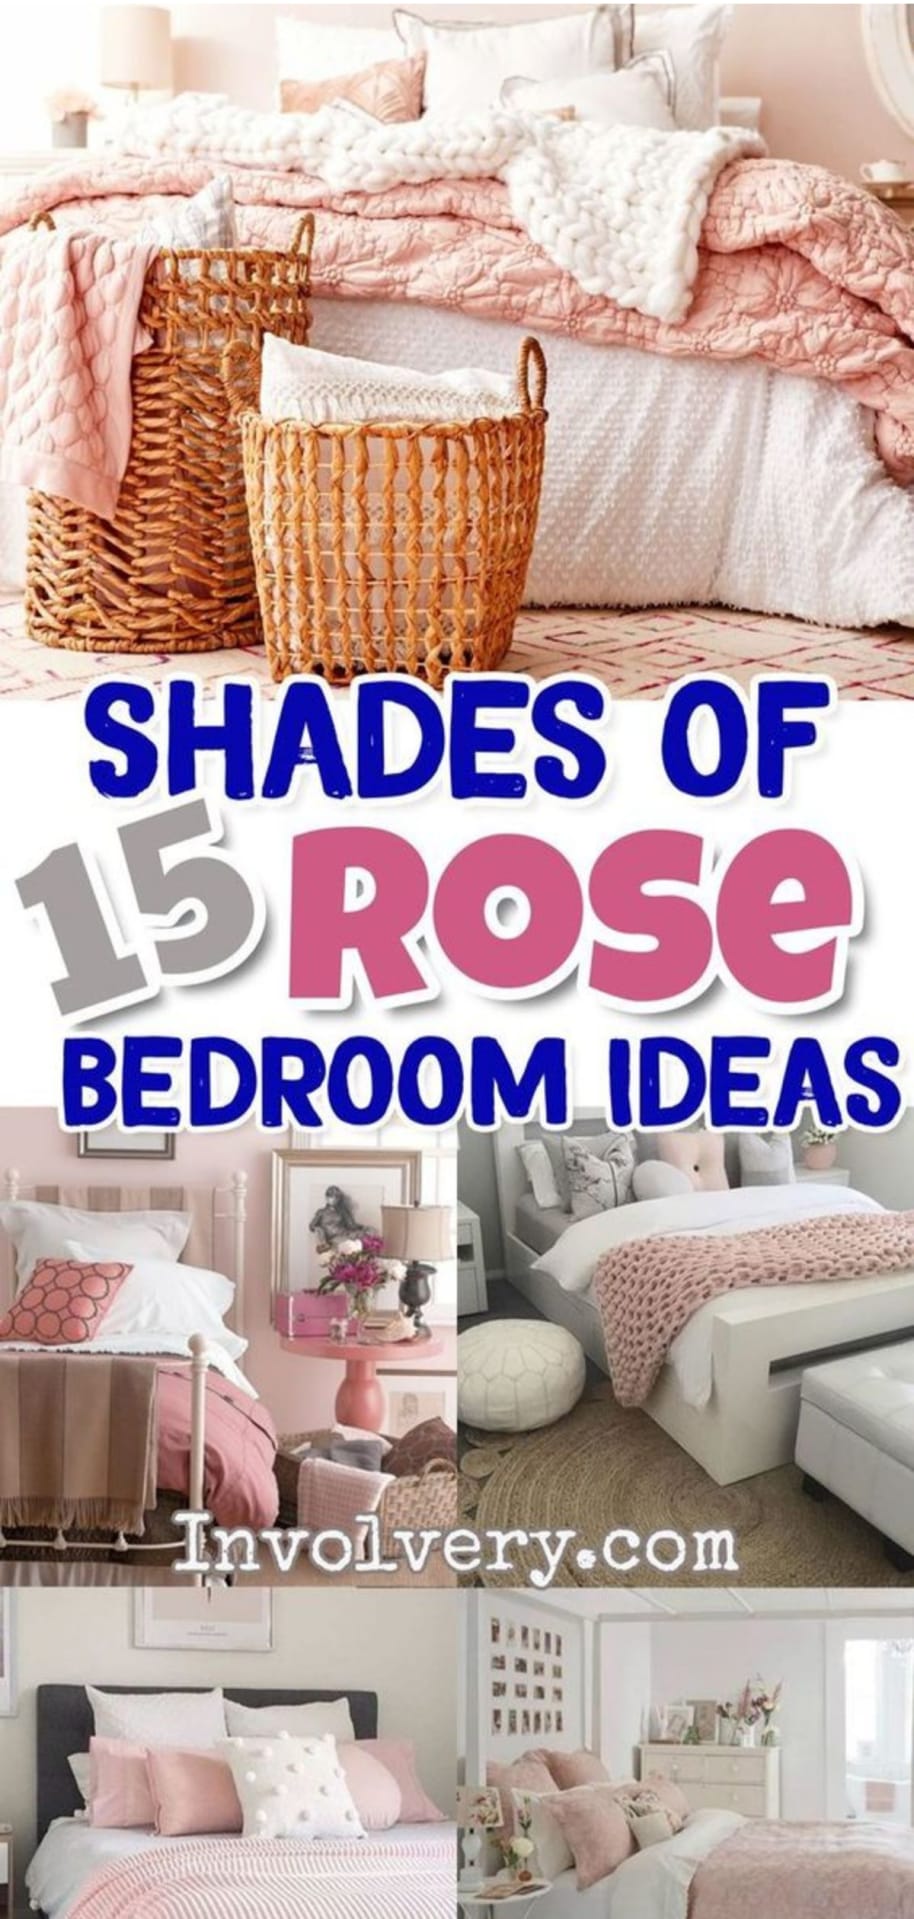 Blush Pink Bedroom Ideas - Dusty Rose Bedroom Decor and Bedding I Love